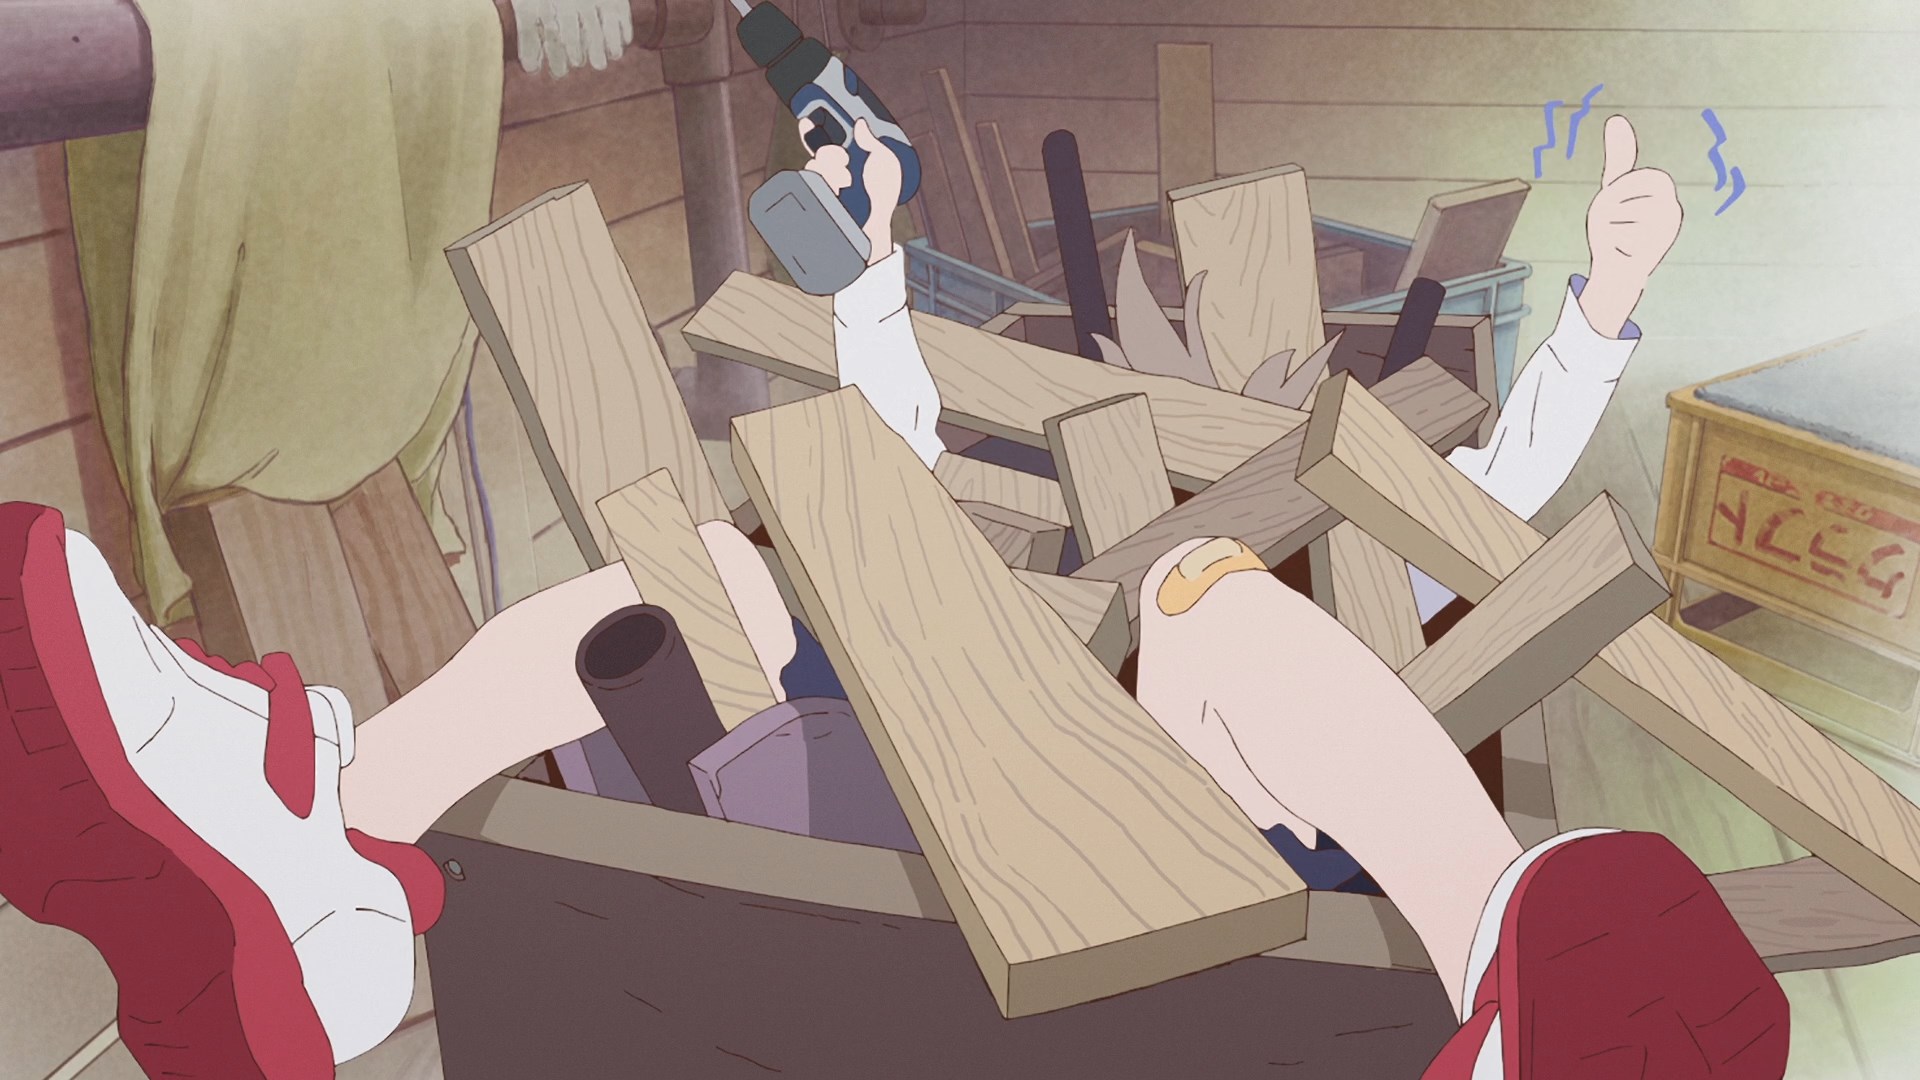 Our protagonist Yua Serufu barely visible under a pile of debris, sticking up her hand in an okay sign